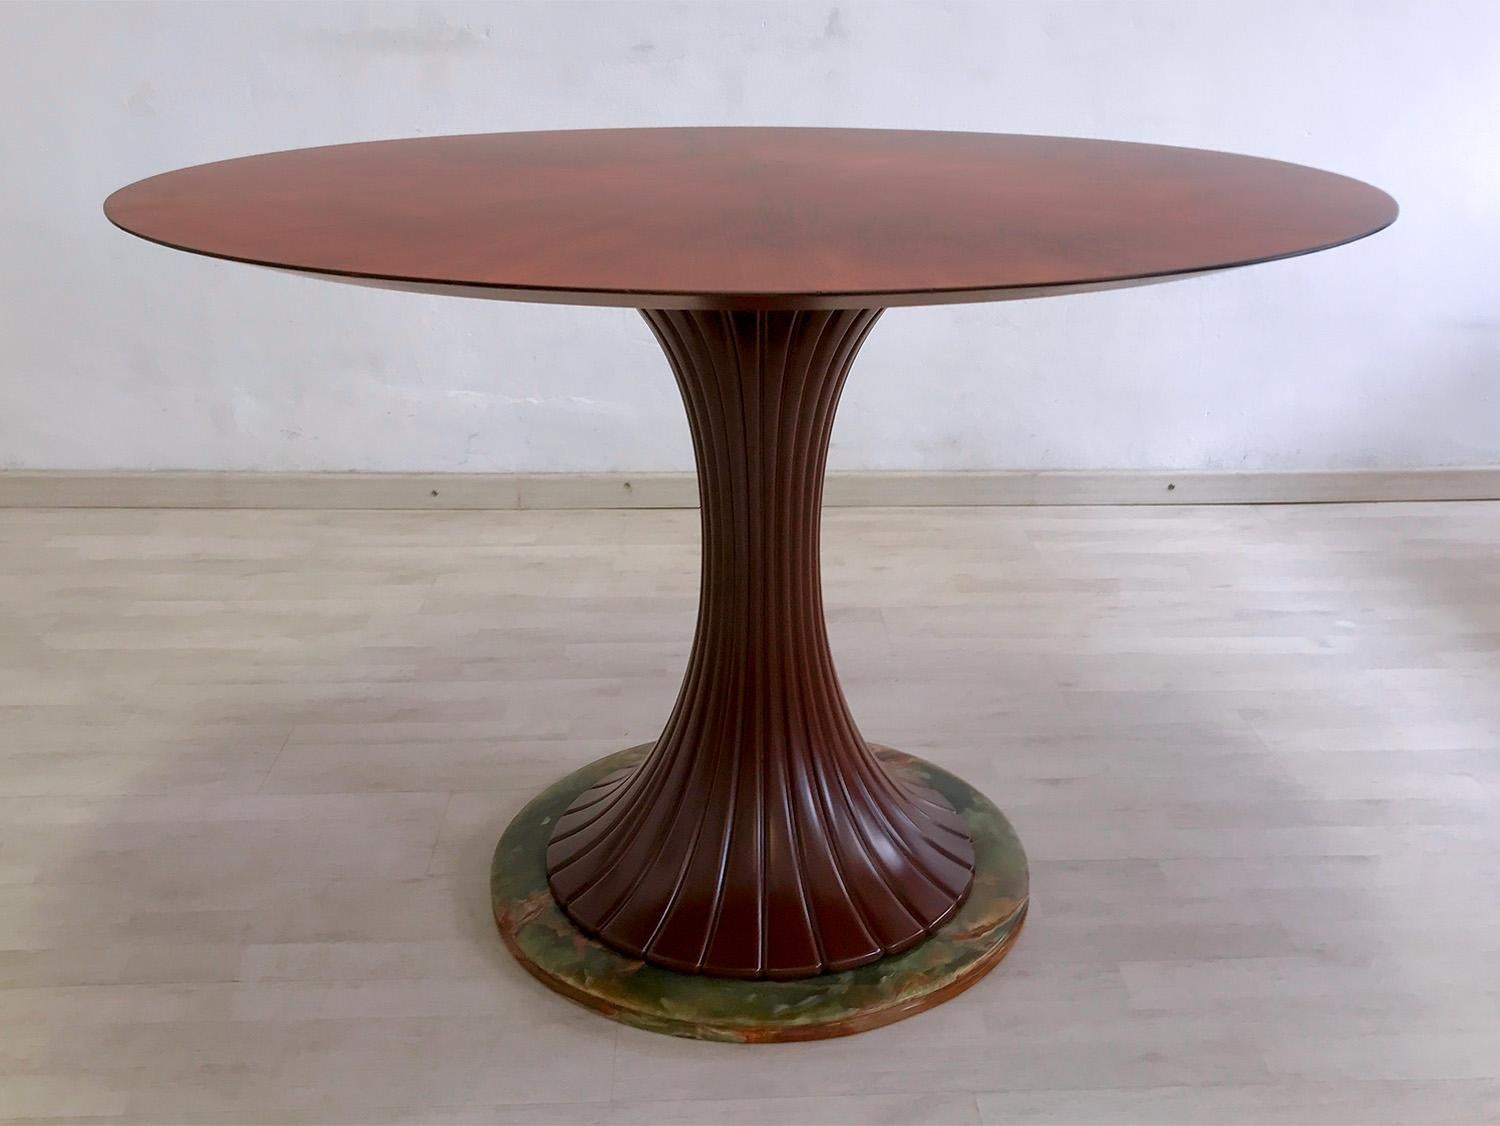 Italian Mid-Century Teak Wood Dining Table by Vittorio Dassi, 1950s In Good Condition For Sale In Traversetolo, IT